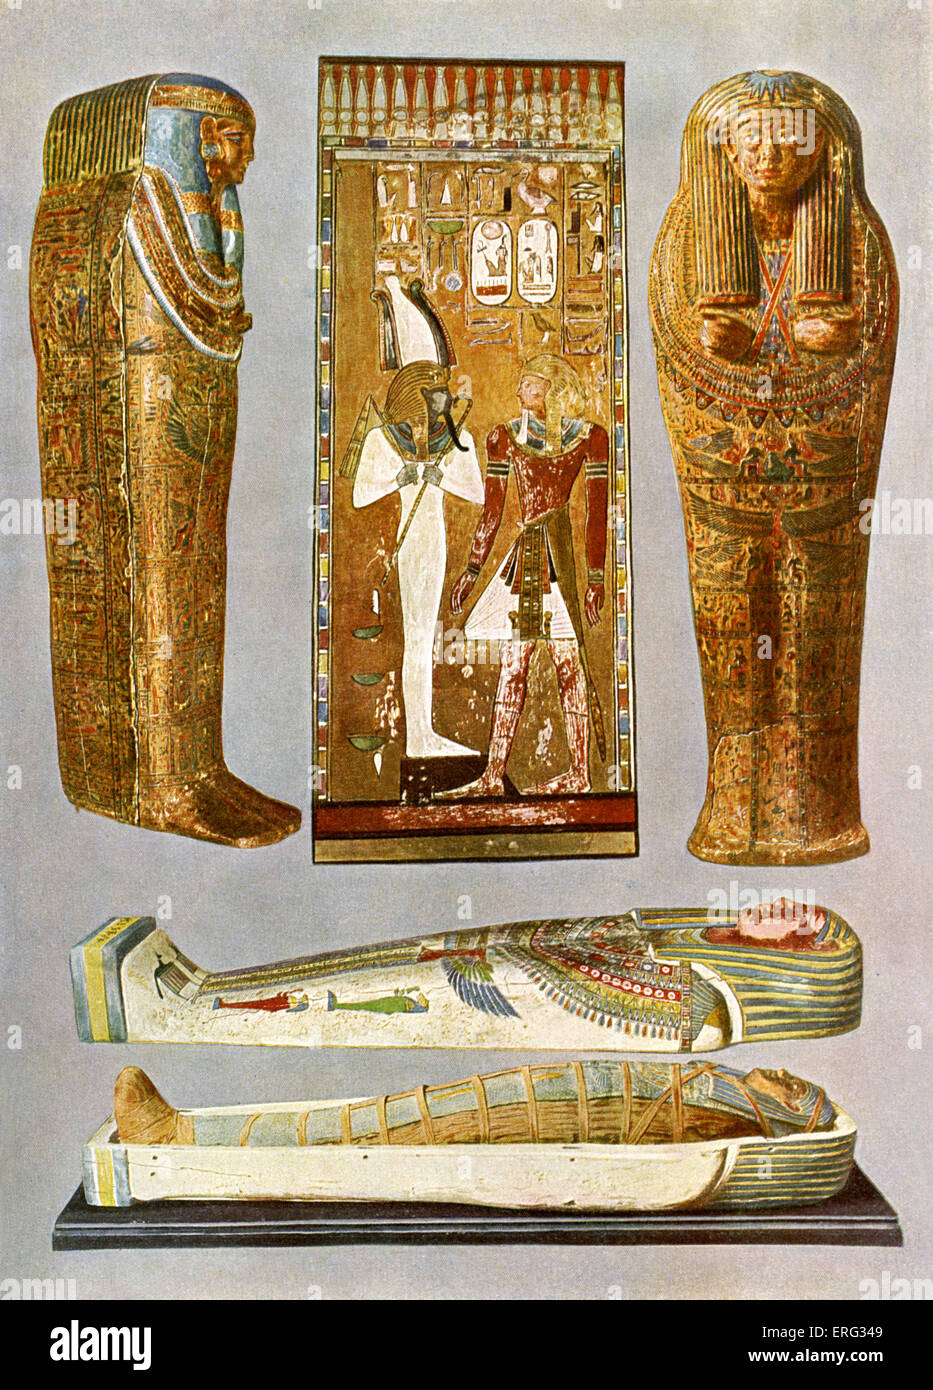 Egyptian fresco and painted sarcophaguses. Left: a woman's sarcophagus from Thebes; centre: King Seihos I before Osiris; right: a priest's sarcophagus; beneath: mummy and sarcophagus of a woman from Abusir. Stock Photo